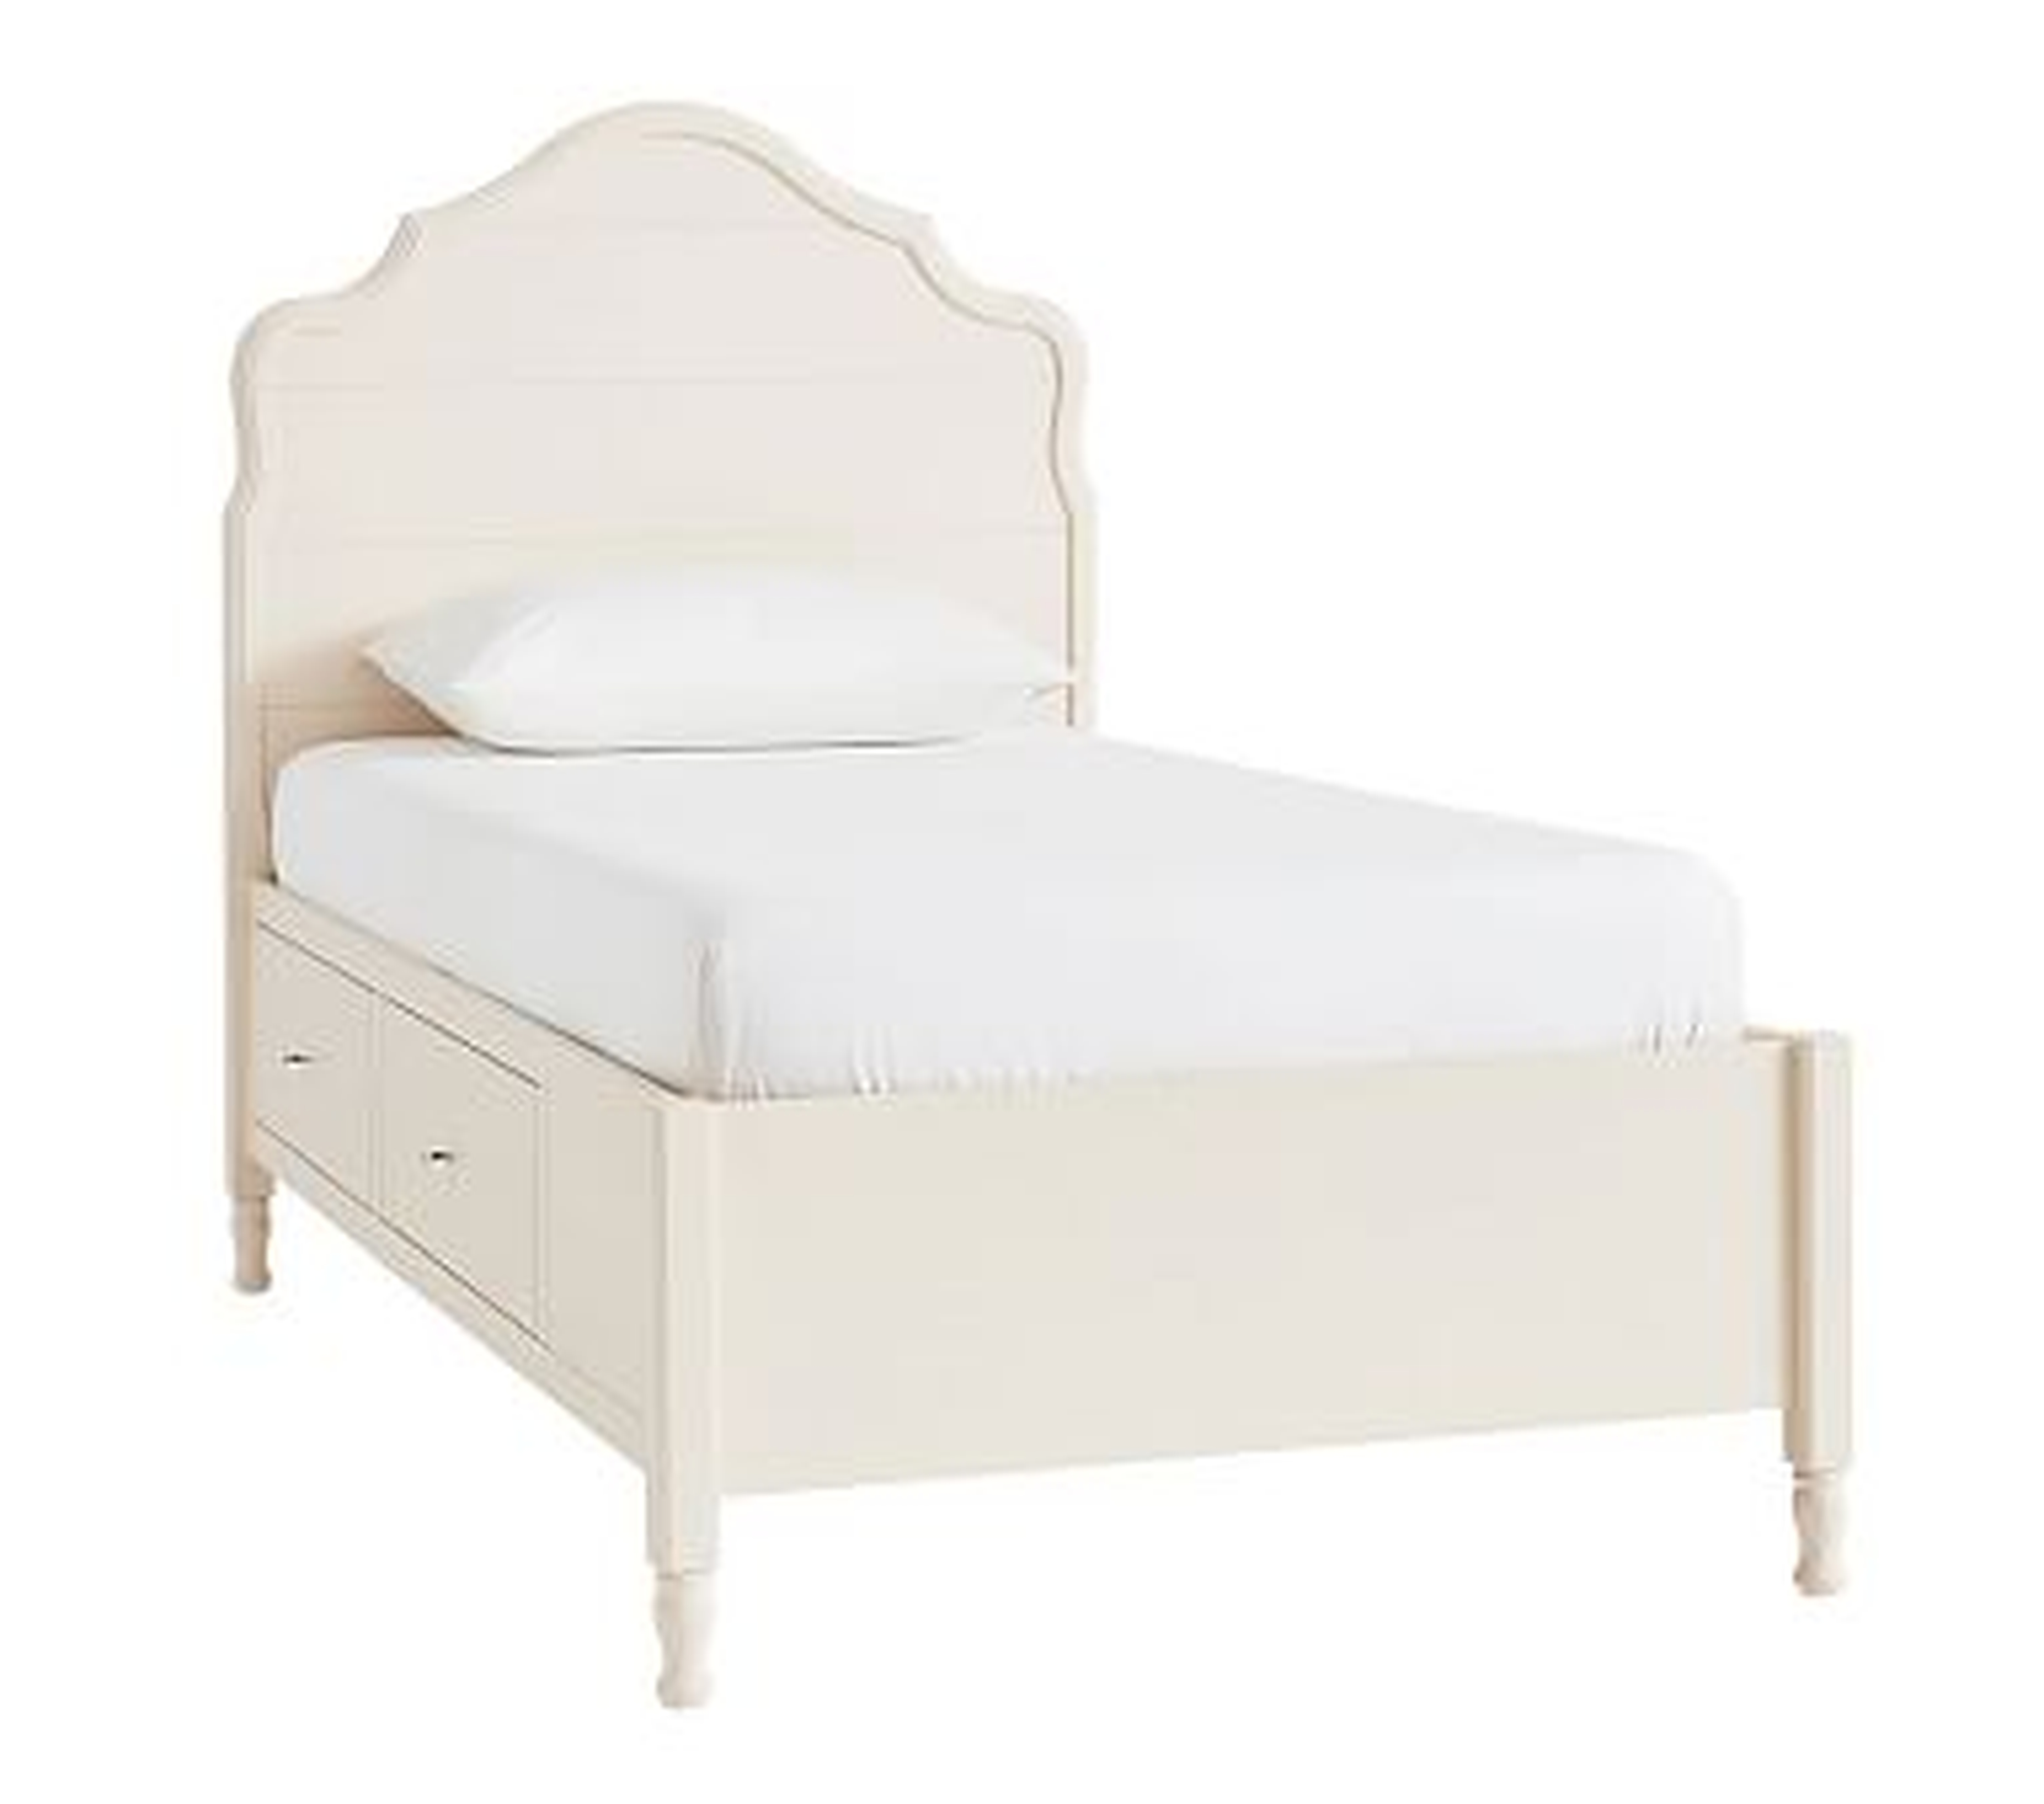 Juliette Storage Bed, Twin, Vintage Simply White - Pottery Barn Kids